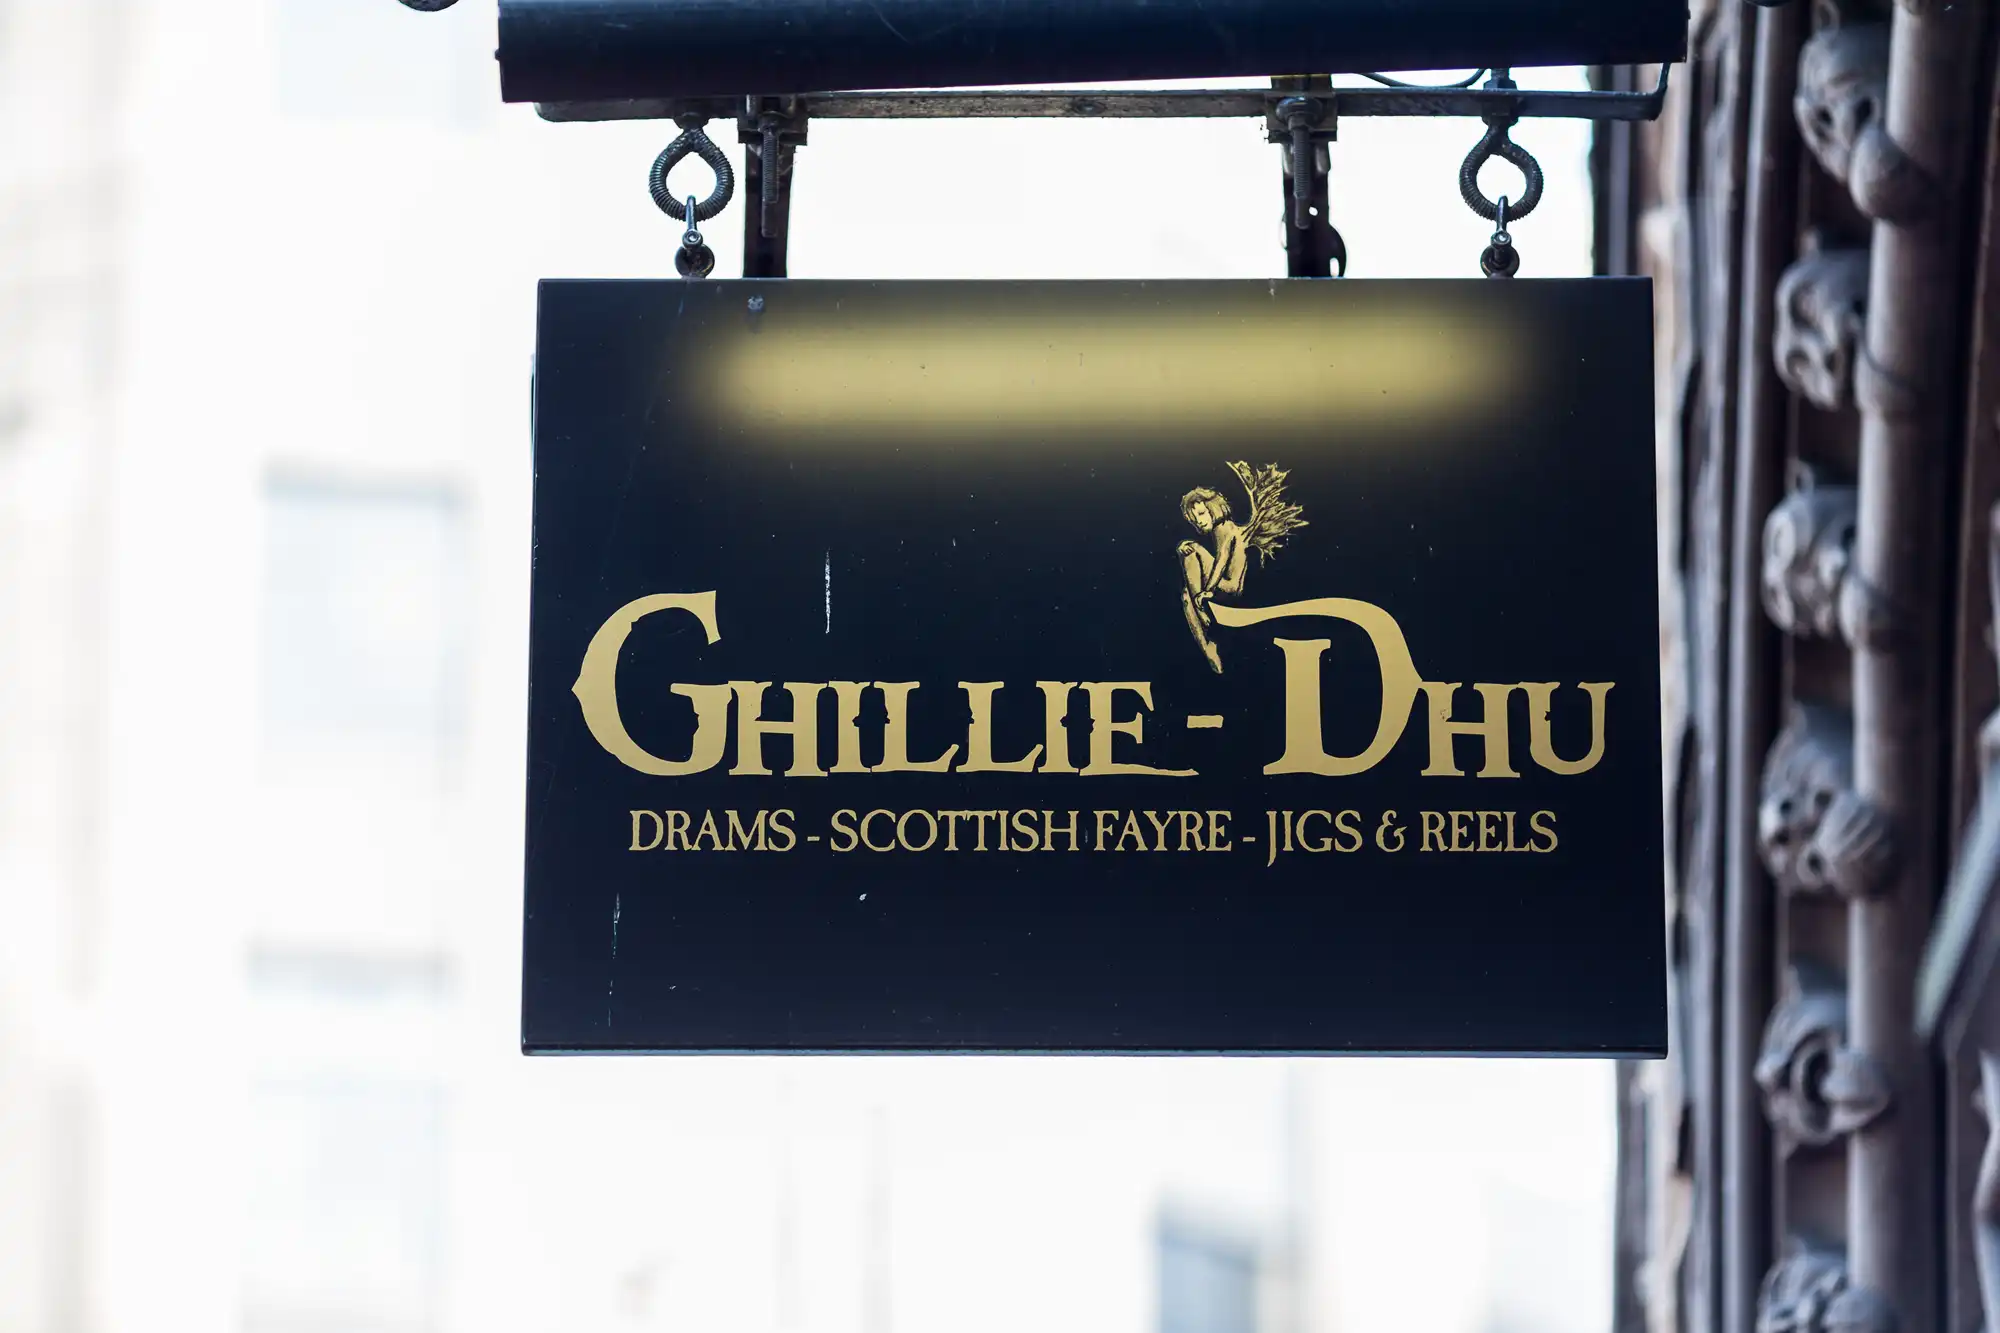 Black and gold sign reading "ghillie-dhu - drams - scottish fayre - jigs & reels" hanging on metal chains, with a blurred building background.